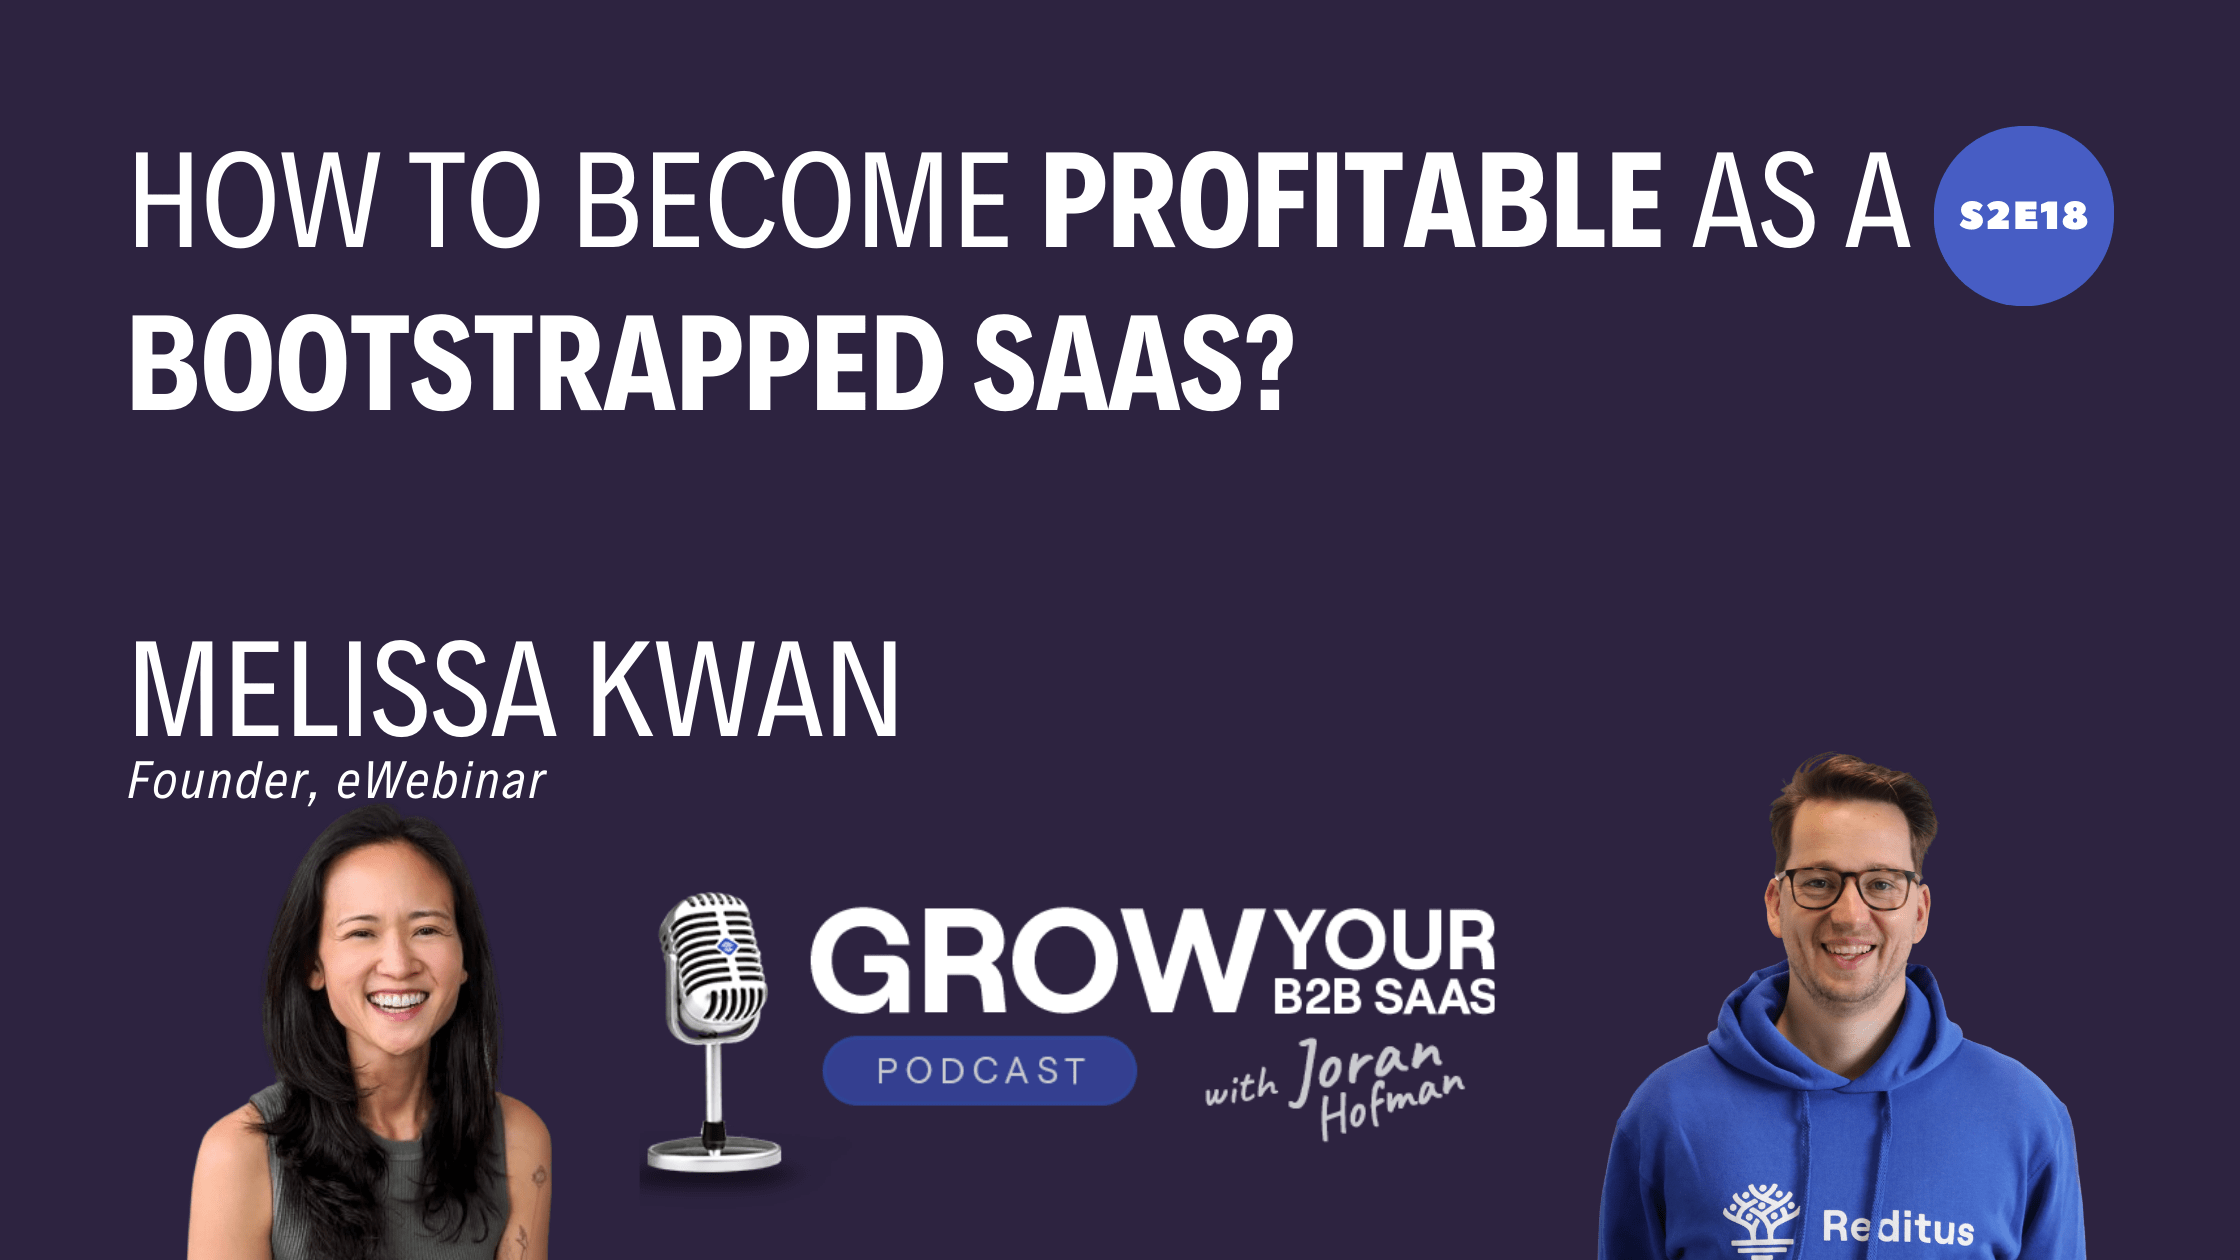 https://www.getreditus.com/podcast/s2e18-how-to-become-profitable-as-a-bootstrapped-saas-with-melissa-kwan/